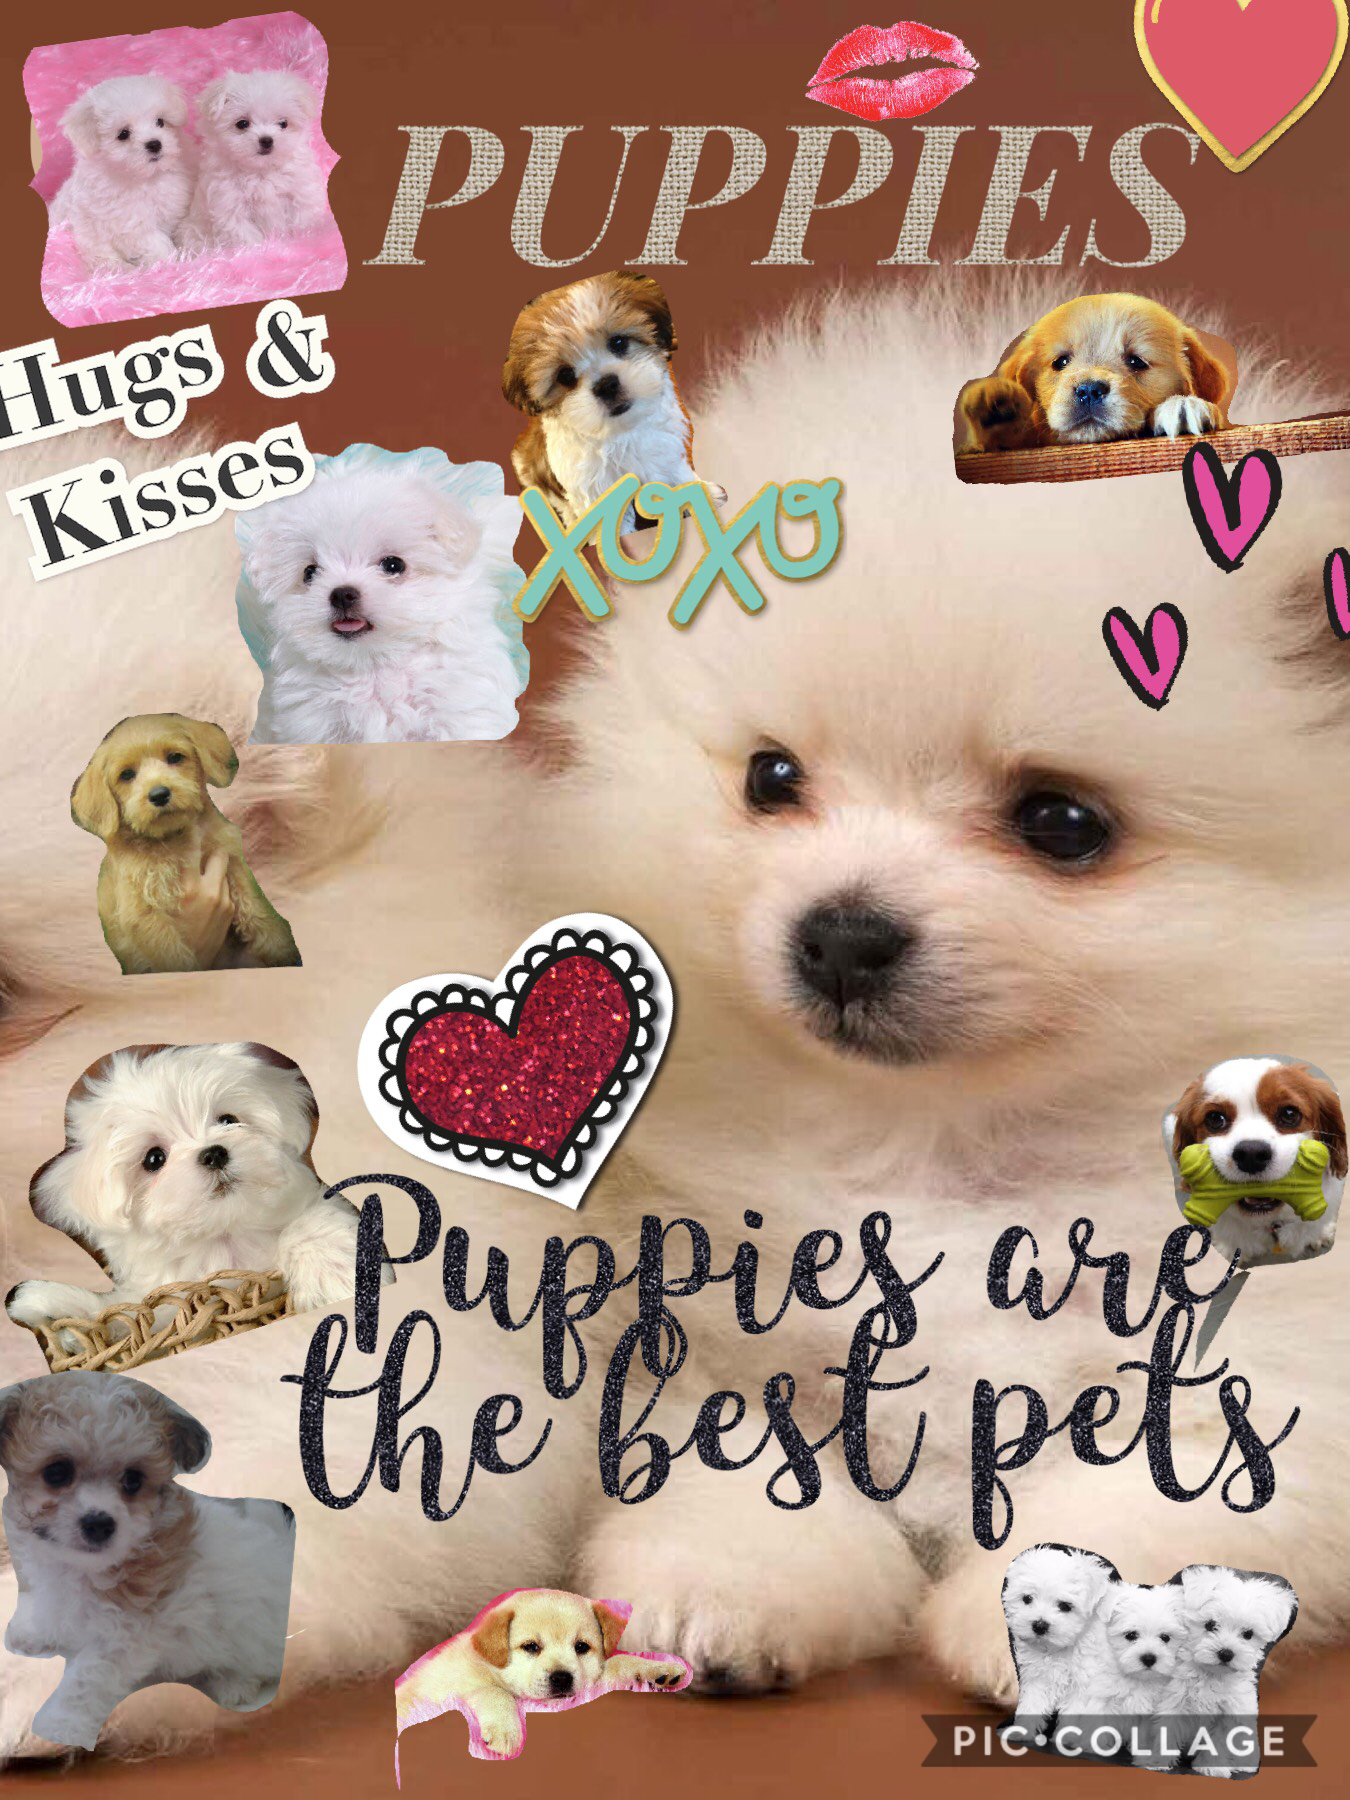 Please agree with me that puppies are the best pets